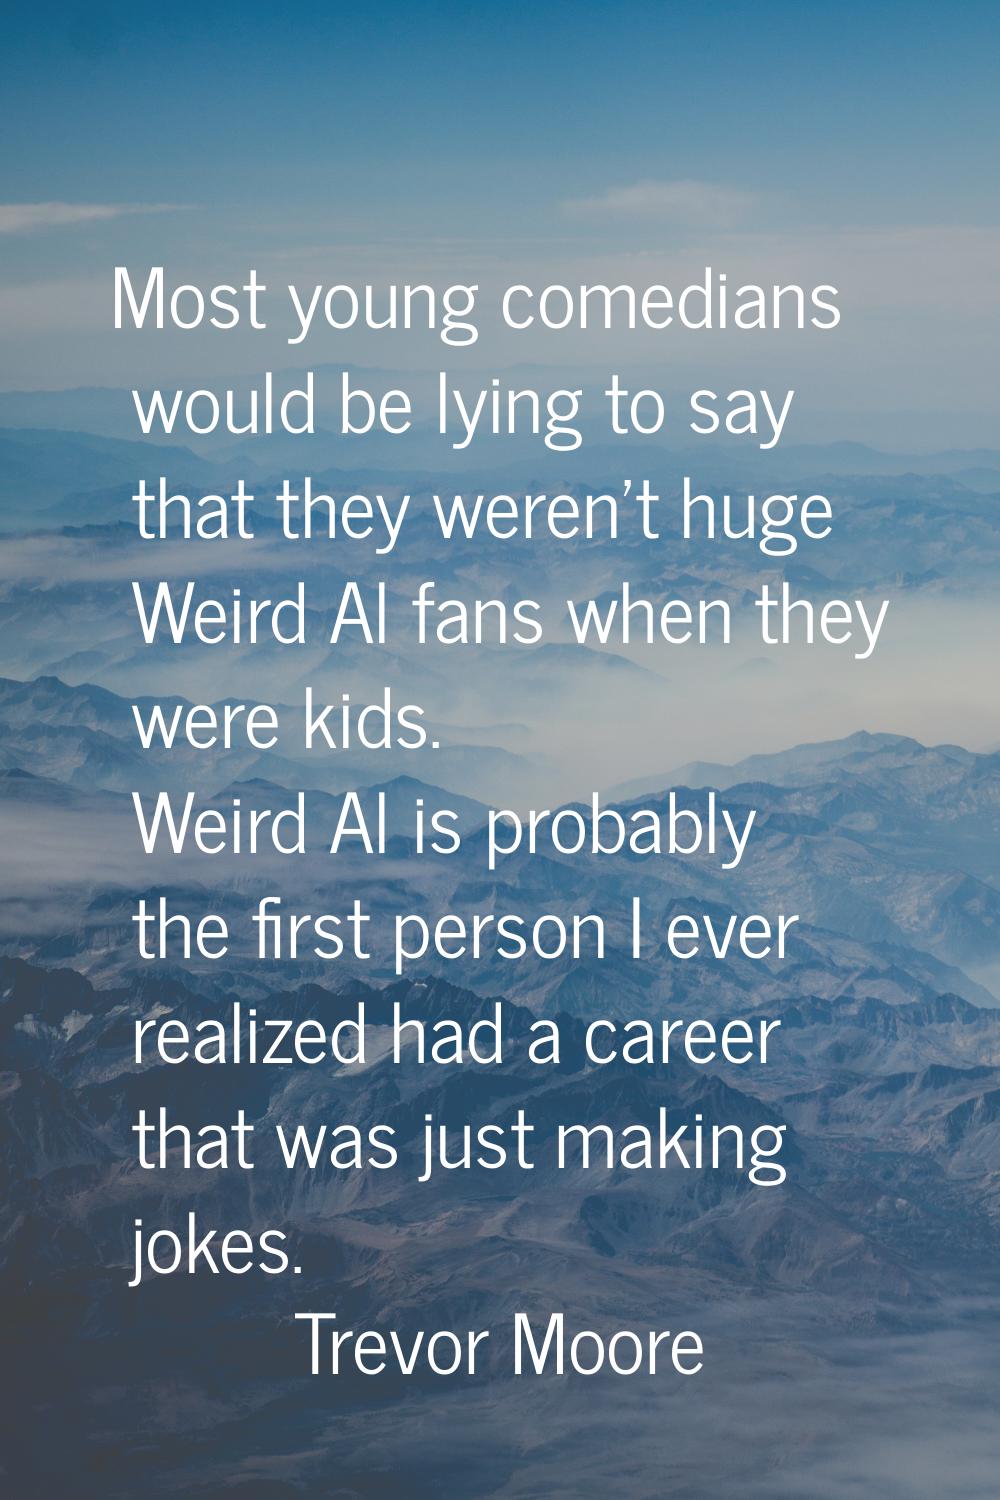 Most young comedians would be lying to say that they weren't huge Weird Al fans when they were kids